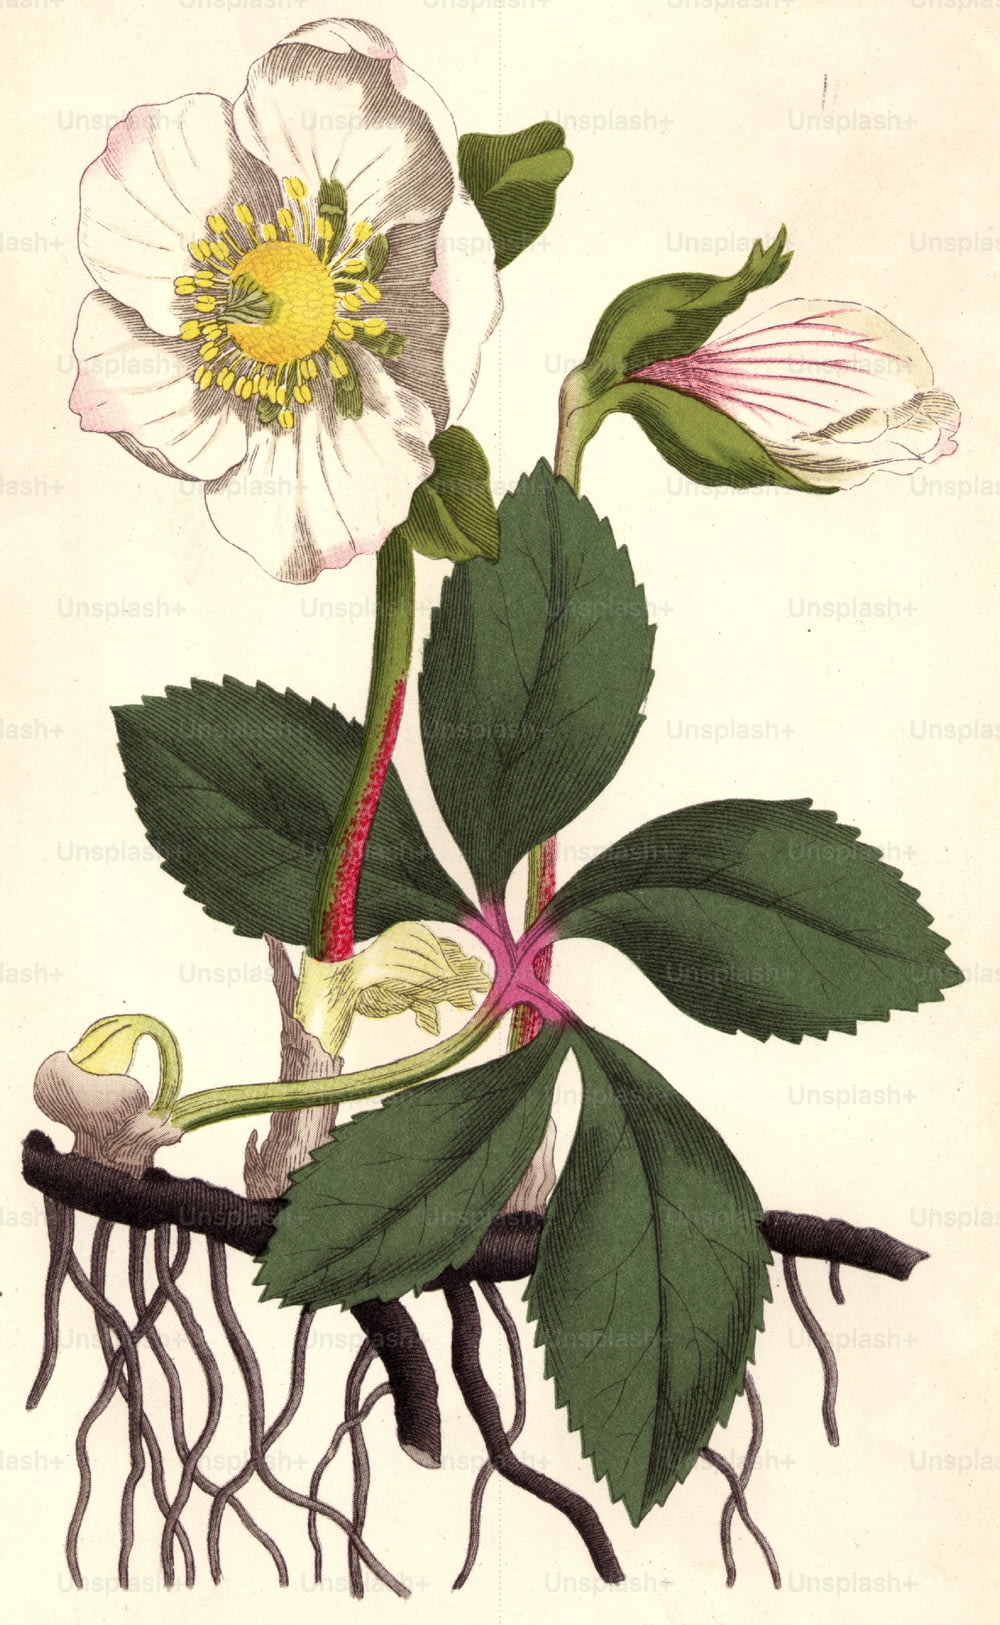 1793:  The black hellebore, or Christmas rose.  Curtis' Botanicla Magazine - pub. 1793  (Photo by Hulton Archive/Getty Images)